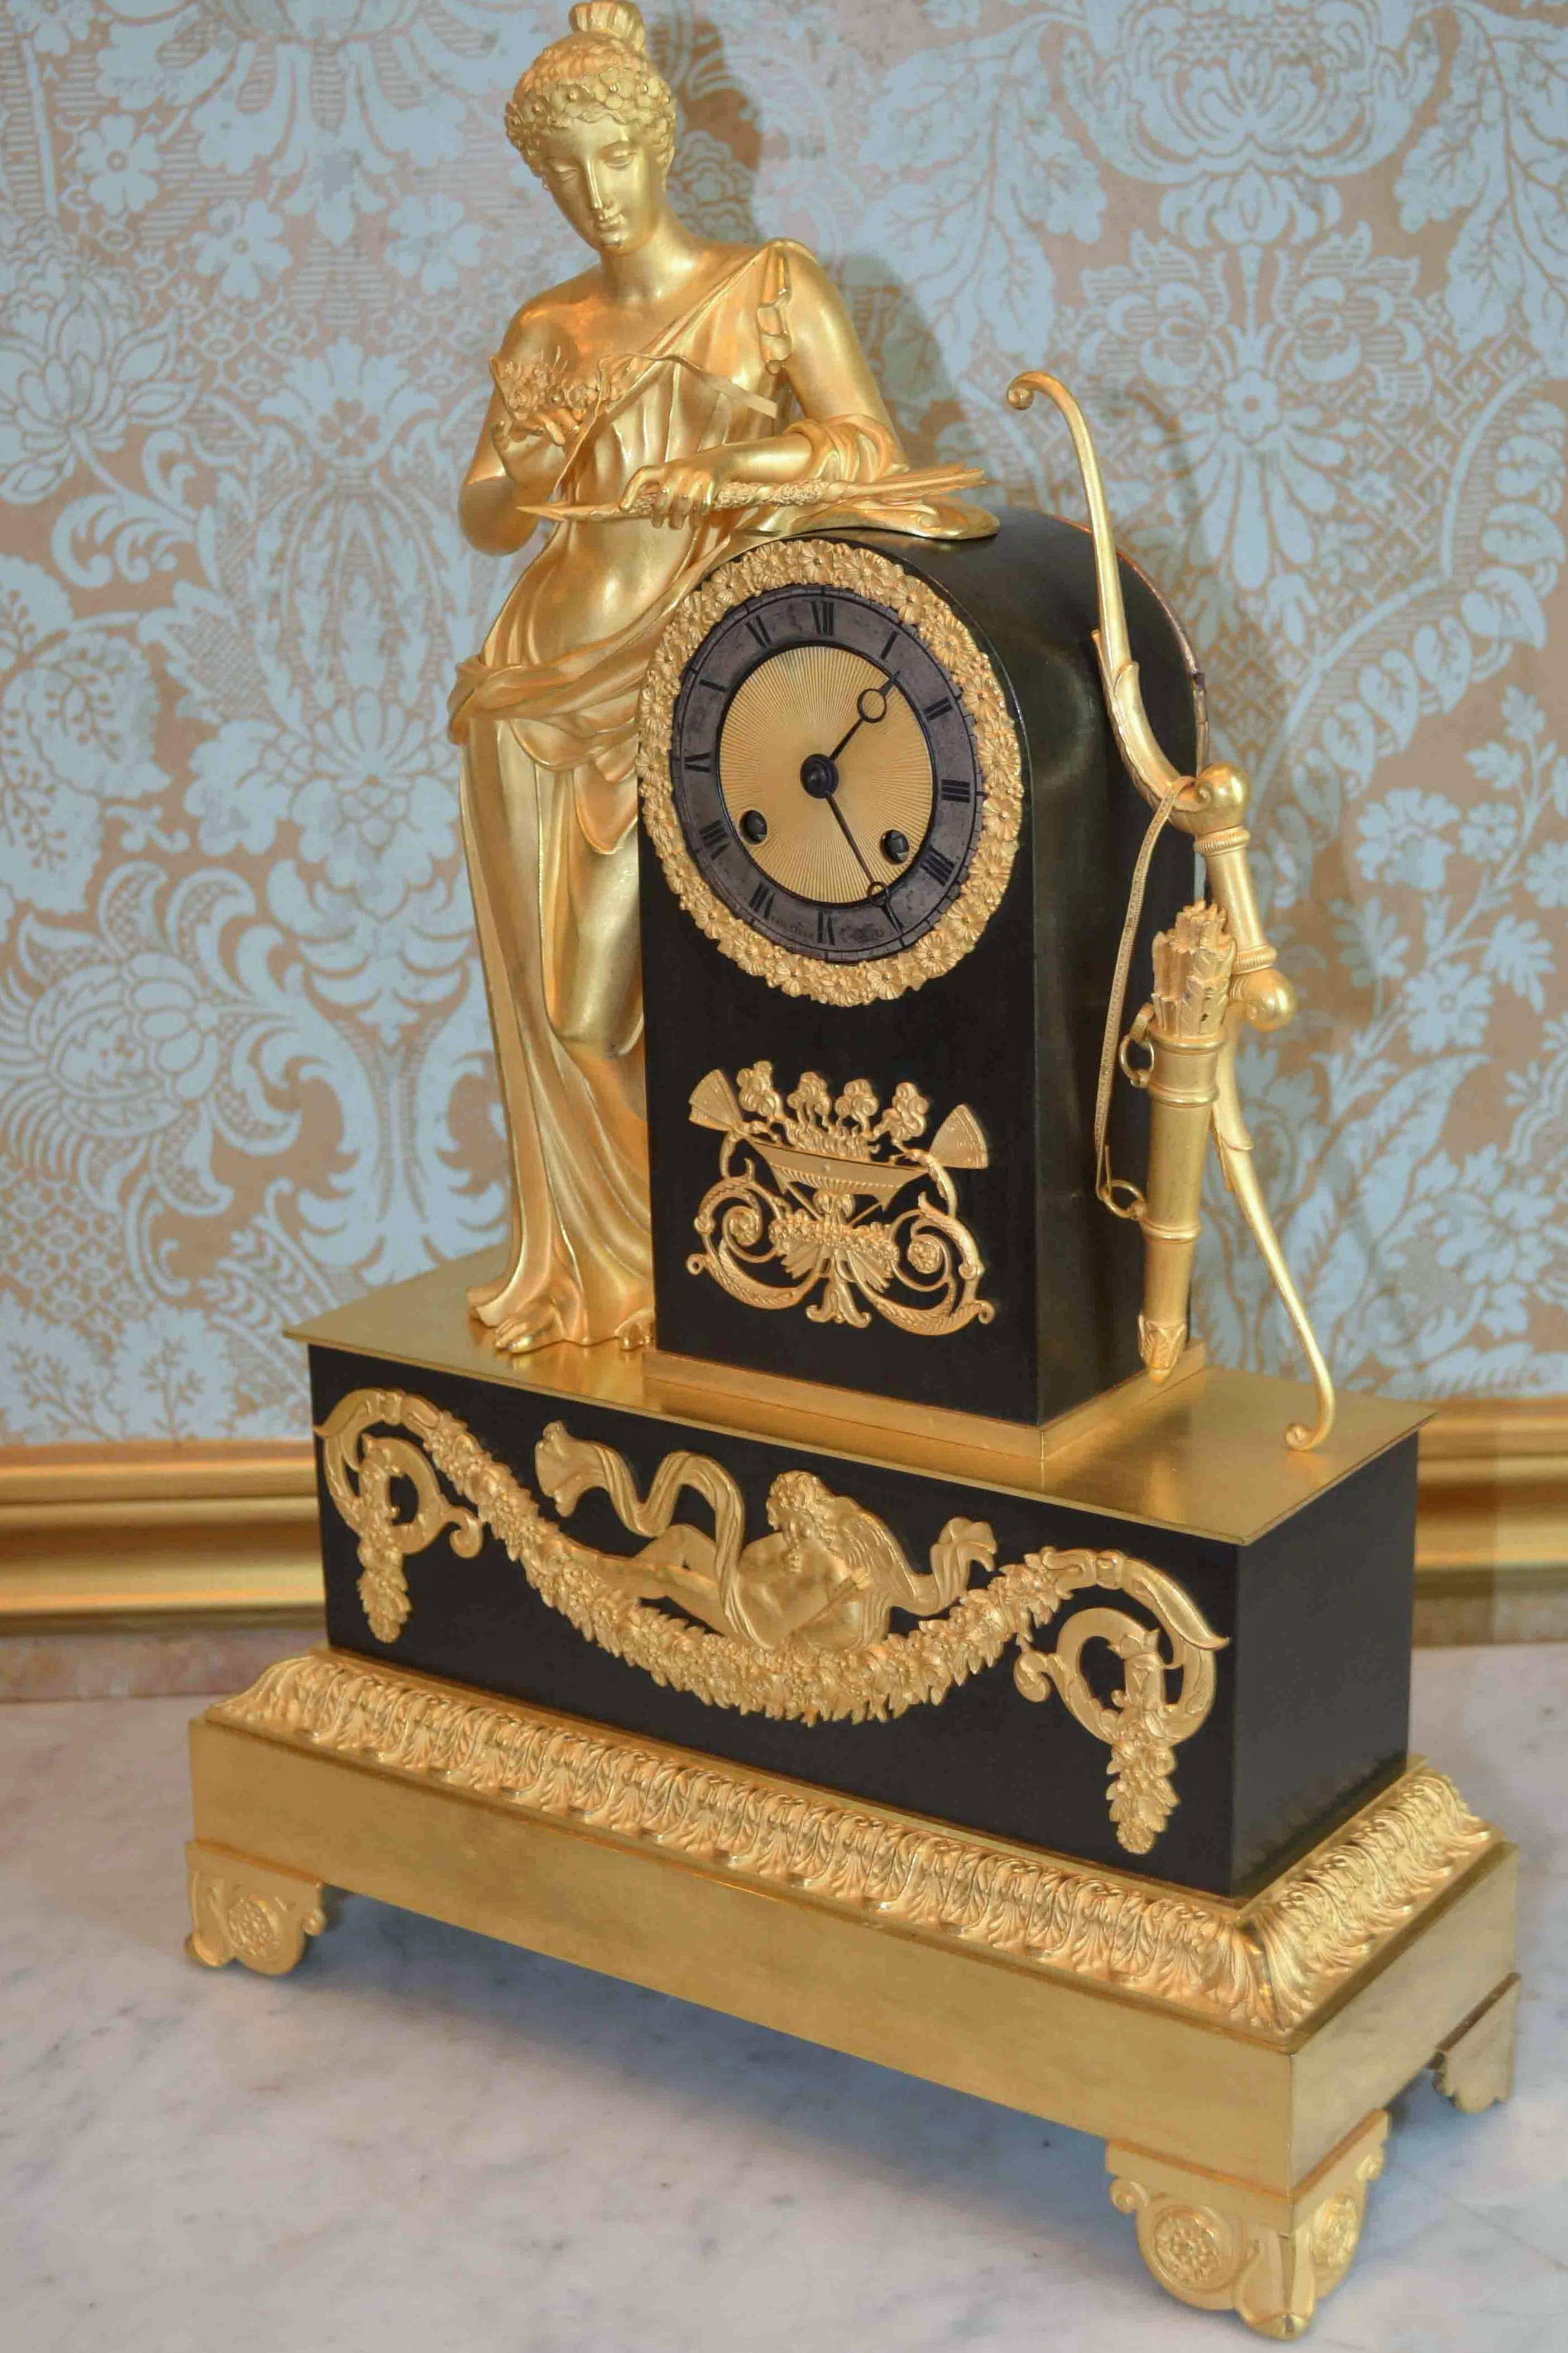 Patinated and gilt bronze Empire clock with a standing Psyche or Venus unravelling her arrows. She stands beside a patinated plinth housing the clock movement with a bow and quiver leaning against it. The lower rectangular base, also of patinated